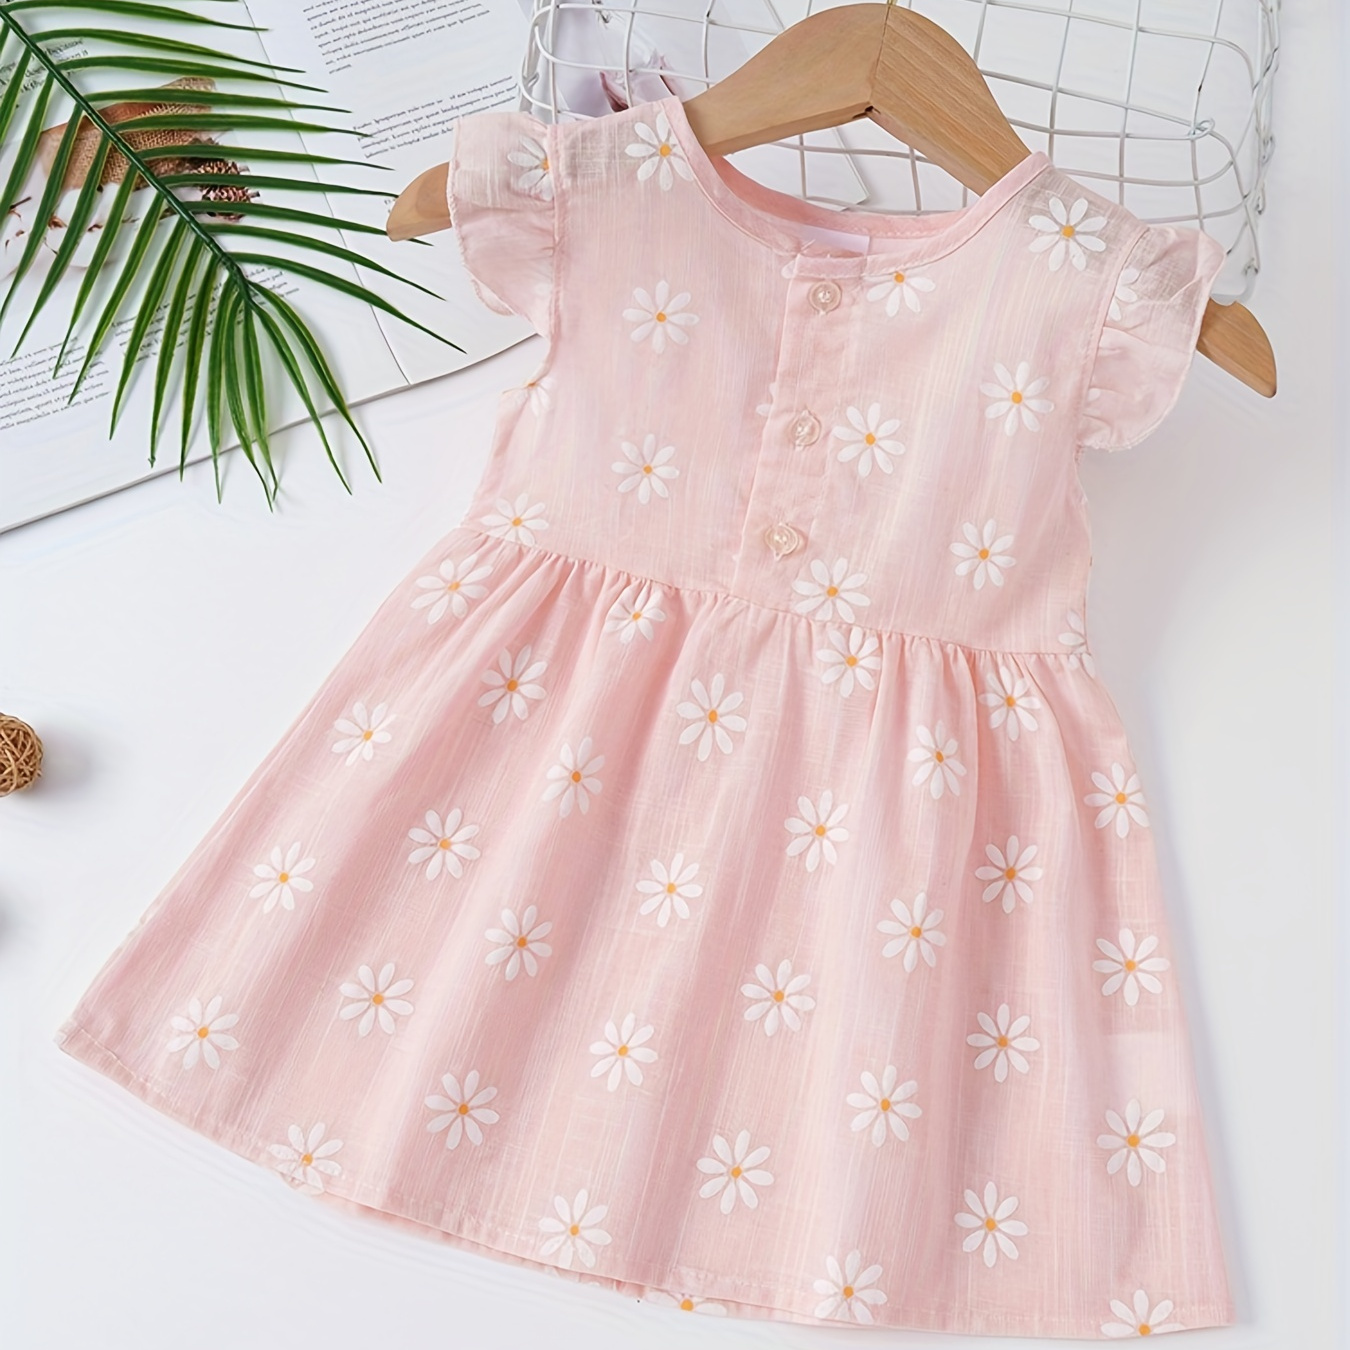 

Baby's Cartoon Daisy Full Print Cotton Dress, Comfy Cap Sleeve Dress, Infant & Toddler Girl's Clothing For Summer/spring, As Gift